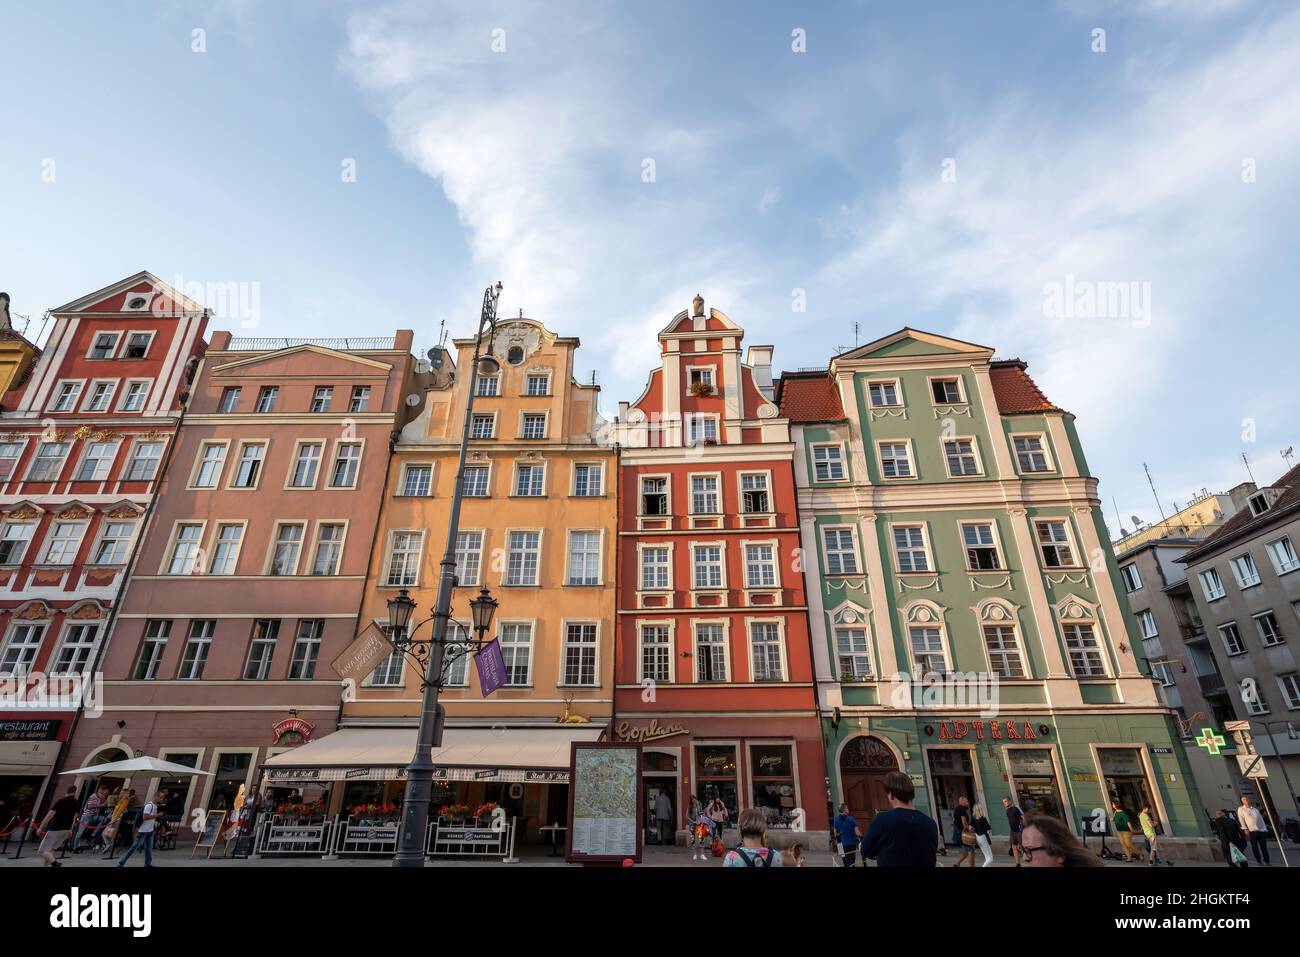 Colorful town houses buildings at Market Square (Rynek Square) - Wroclaw, Poland Stock Photo